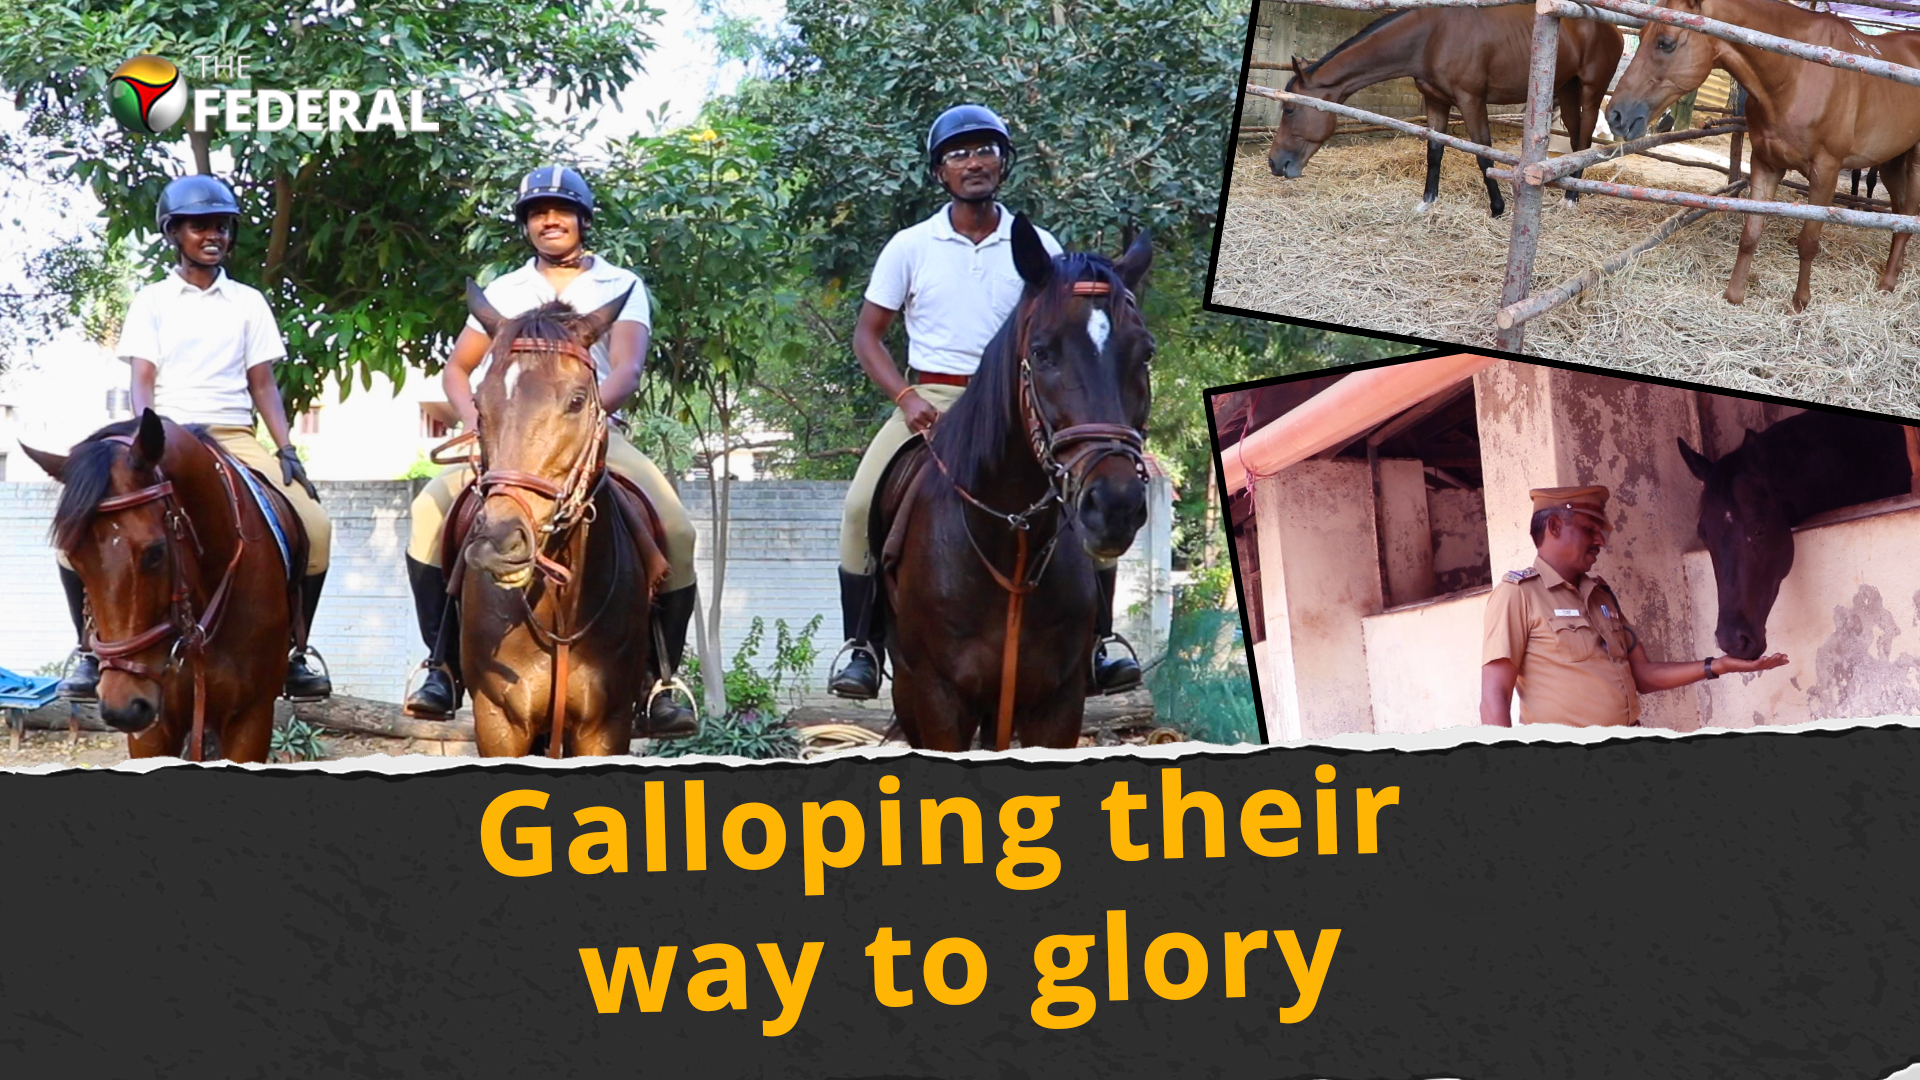 TN police equestrian team: Galloping their way to glory